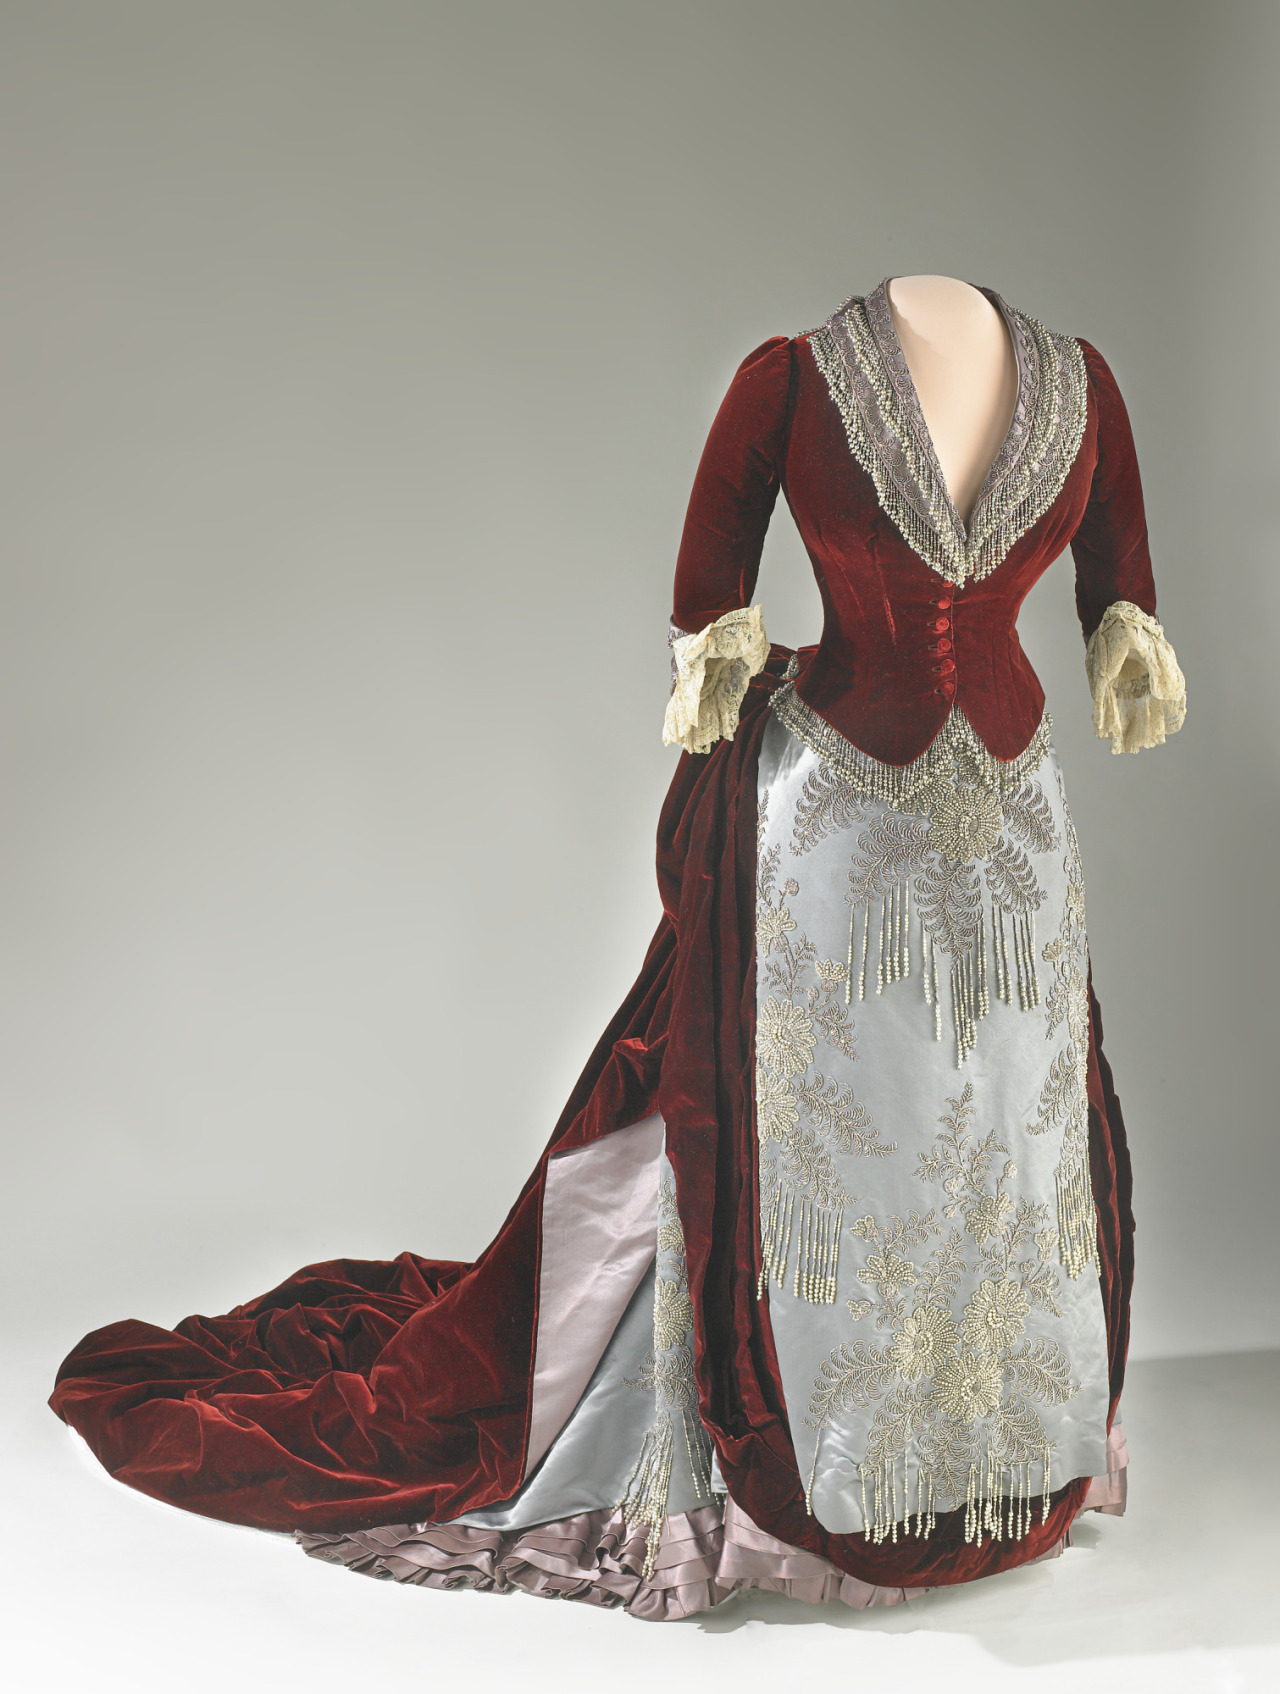 Evening Dress Worn by Caroline Harrison1885-1892National Museum of American History #evening dress#fashion history#historical fashion#bustle era#1880s#1890s#19th century#united states#red#blue#lace#velvet#victorian#victorian fashion#gilded age #national museum of american history #smithsonian institution